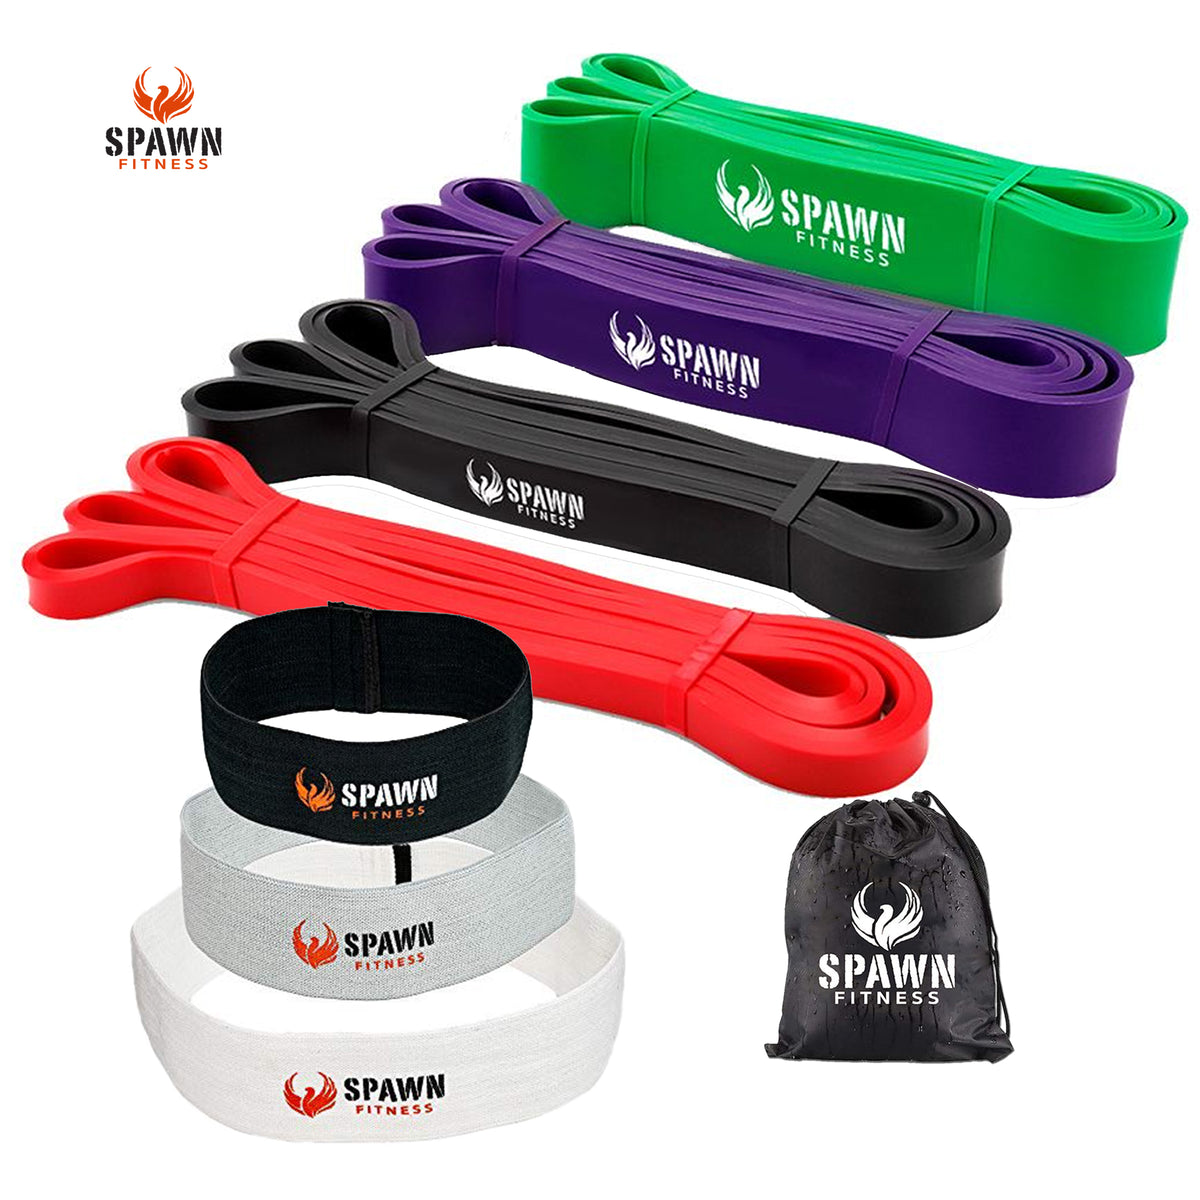 Spawn Fitness Fabric Resistance Exercise Bands for Workout with